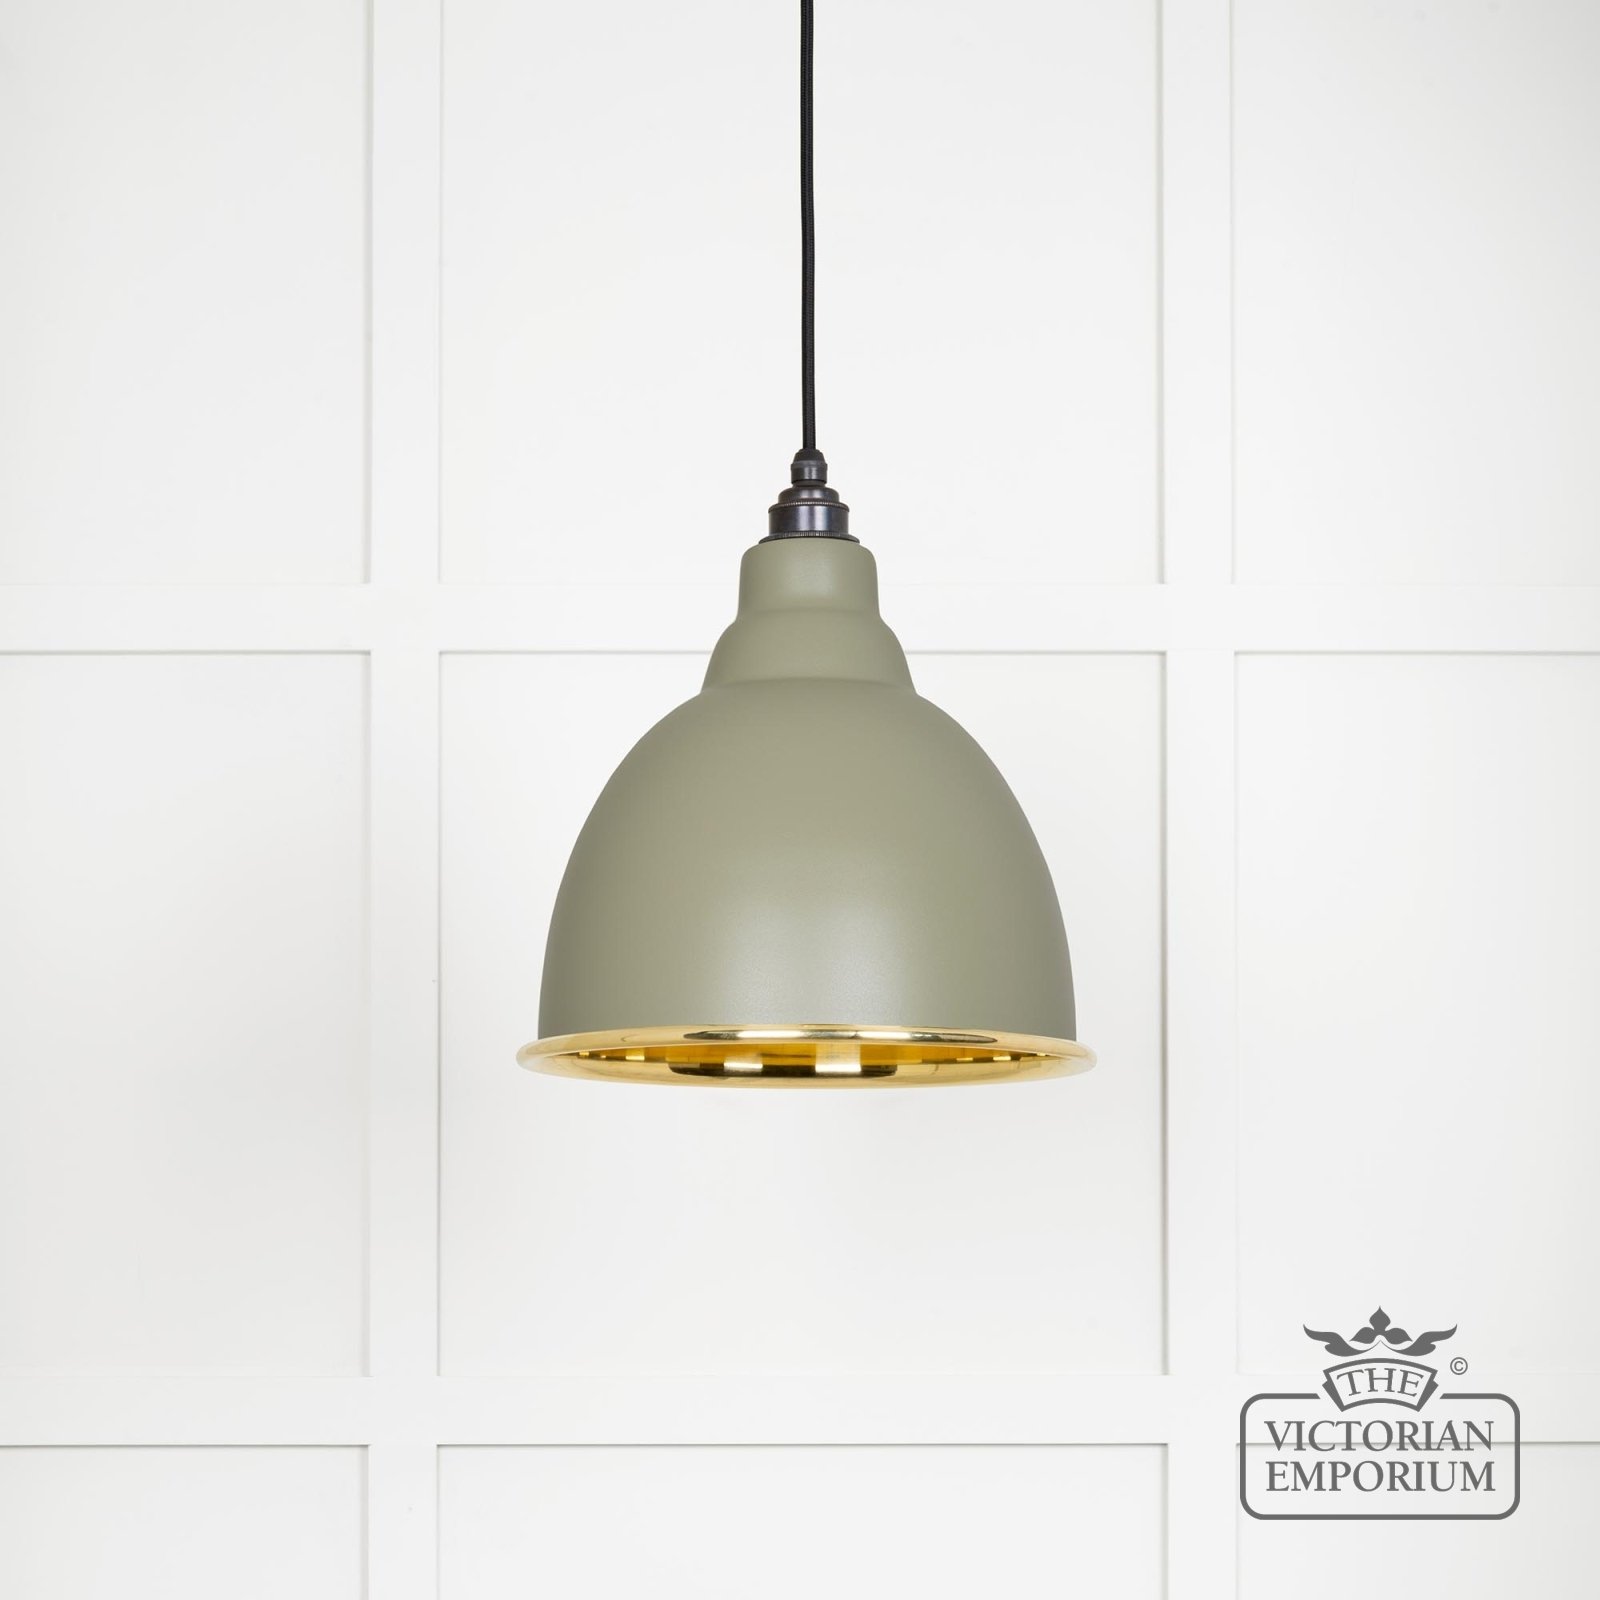 Brindle pendant light in Smooth brass and Tump finish